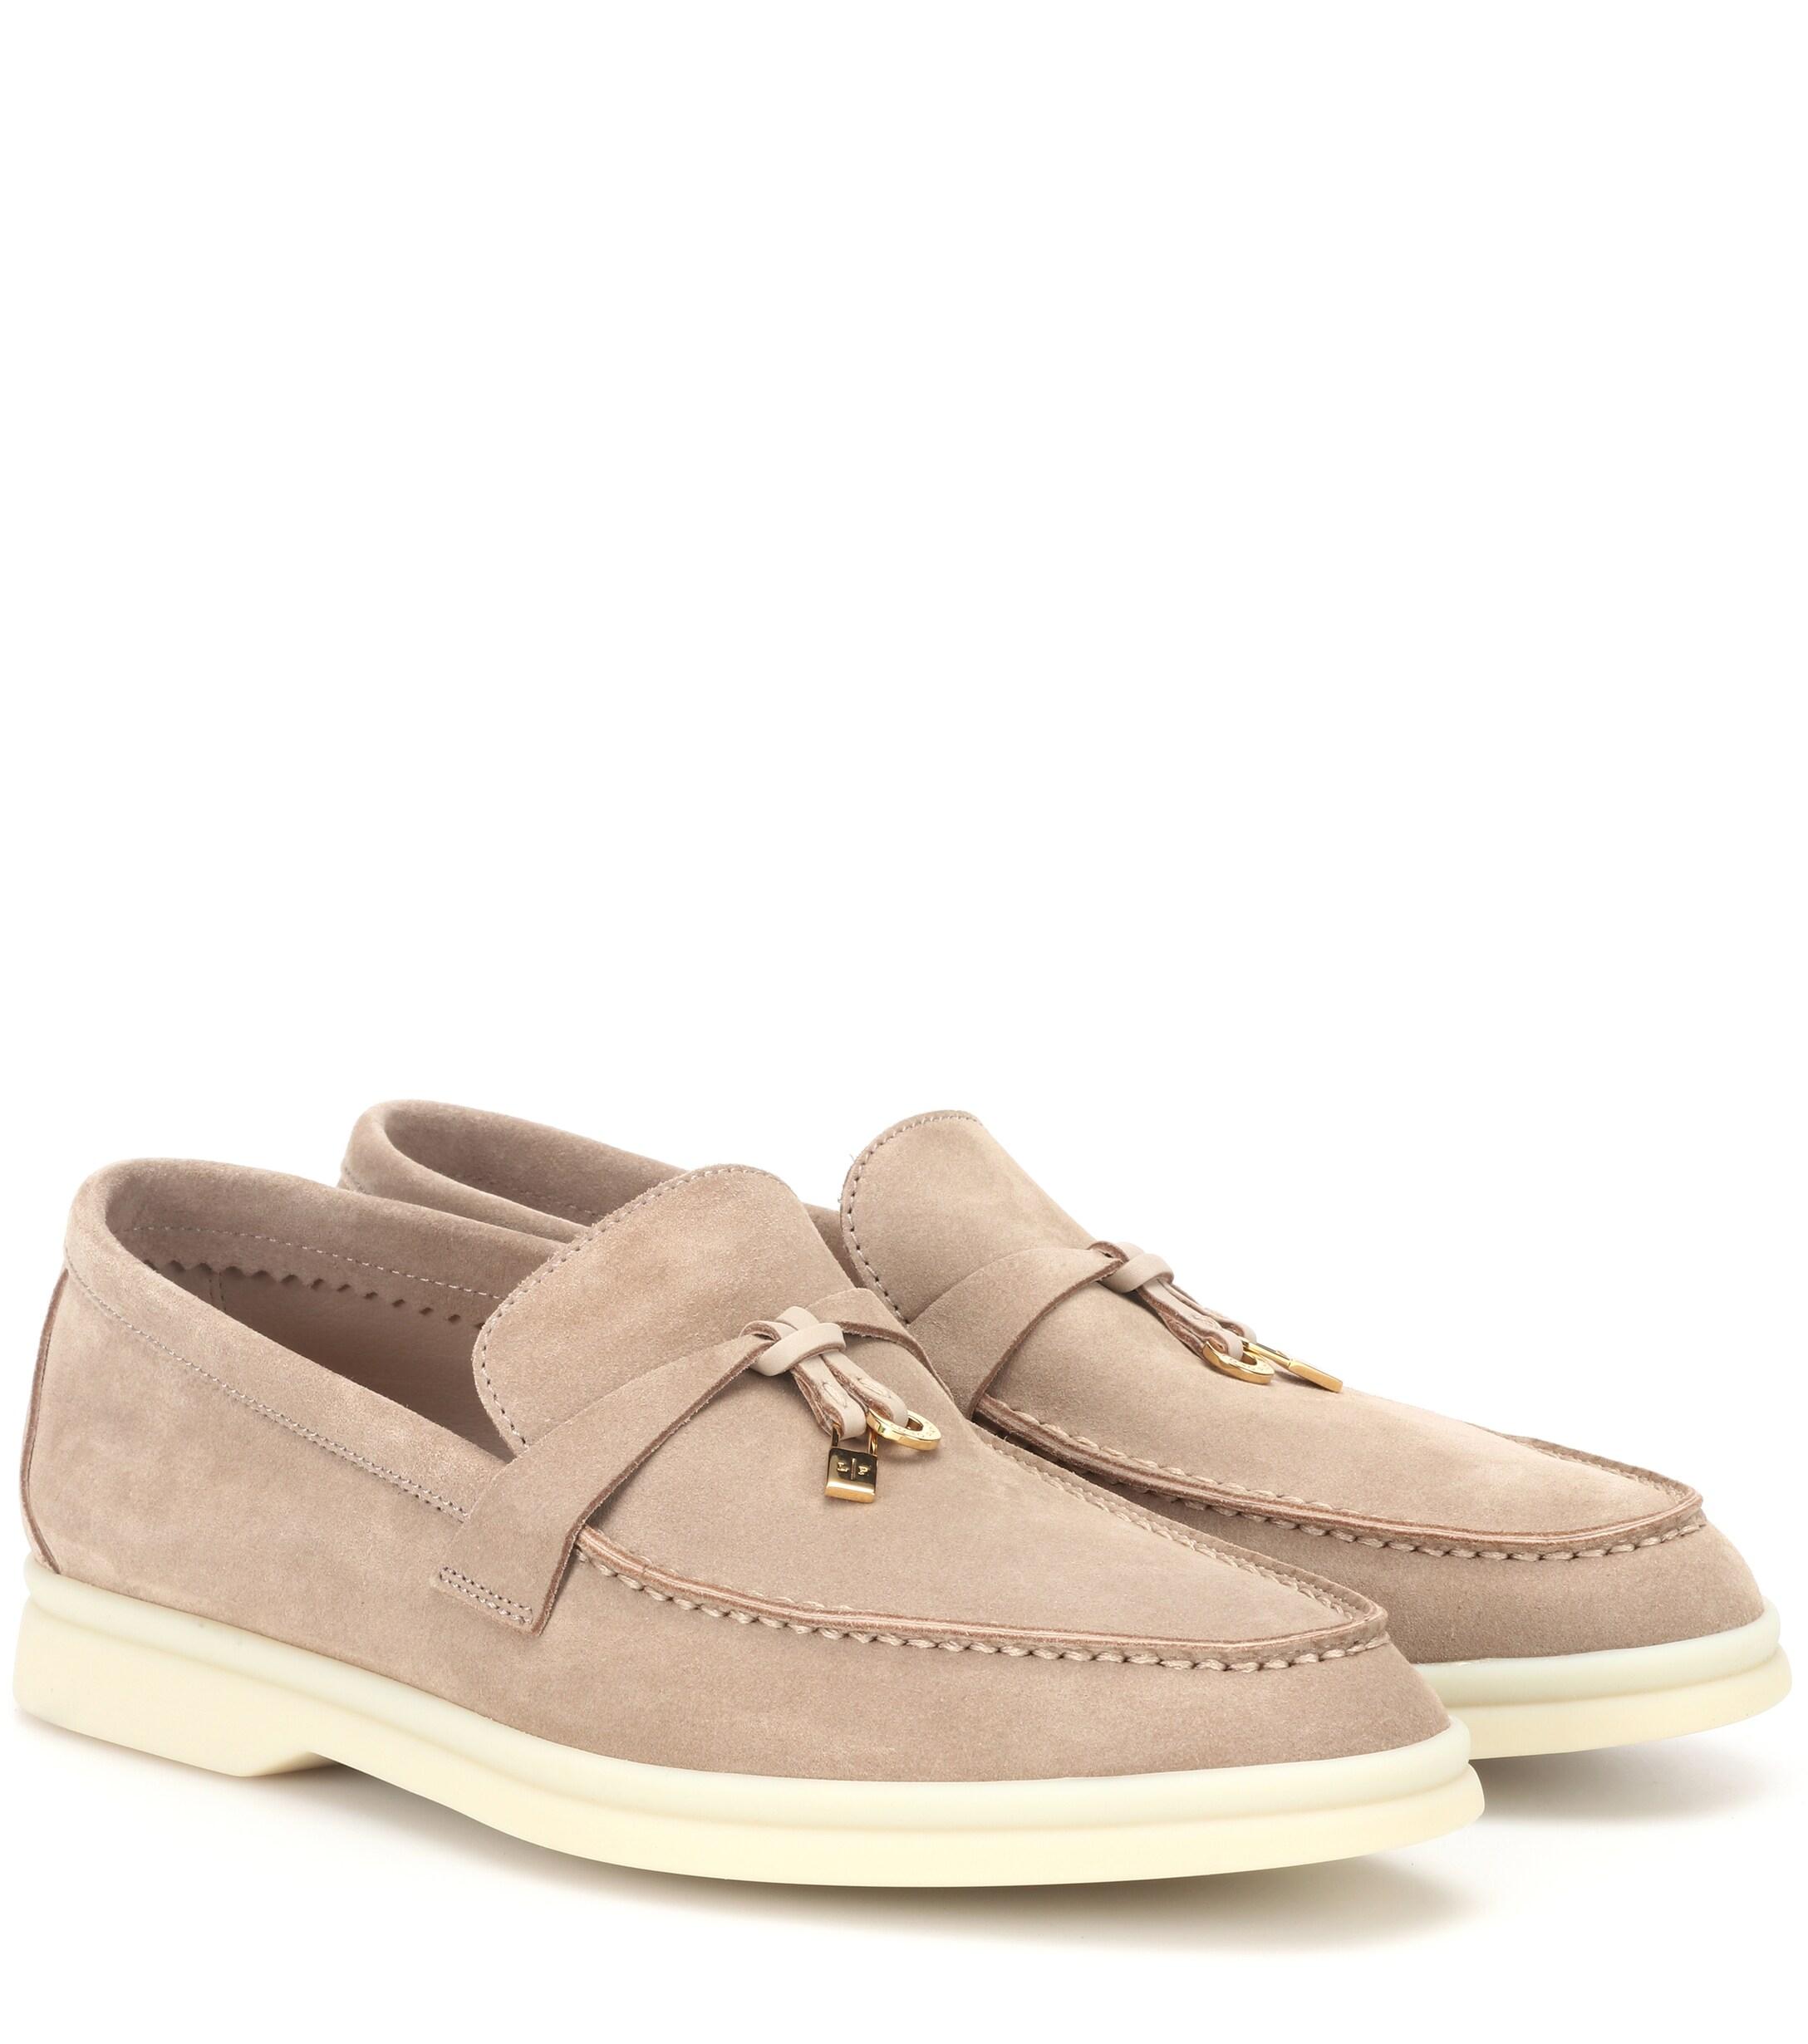 Loro Piana Summer Charms Walk Suede Loafers in Natural | Lyst